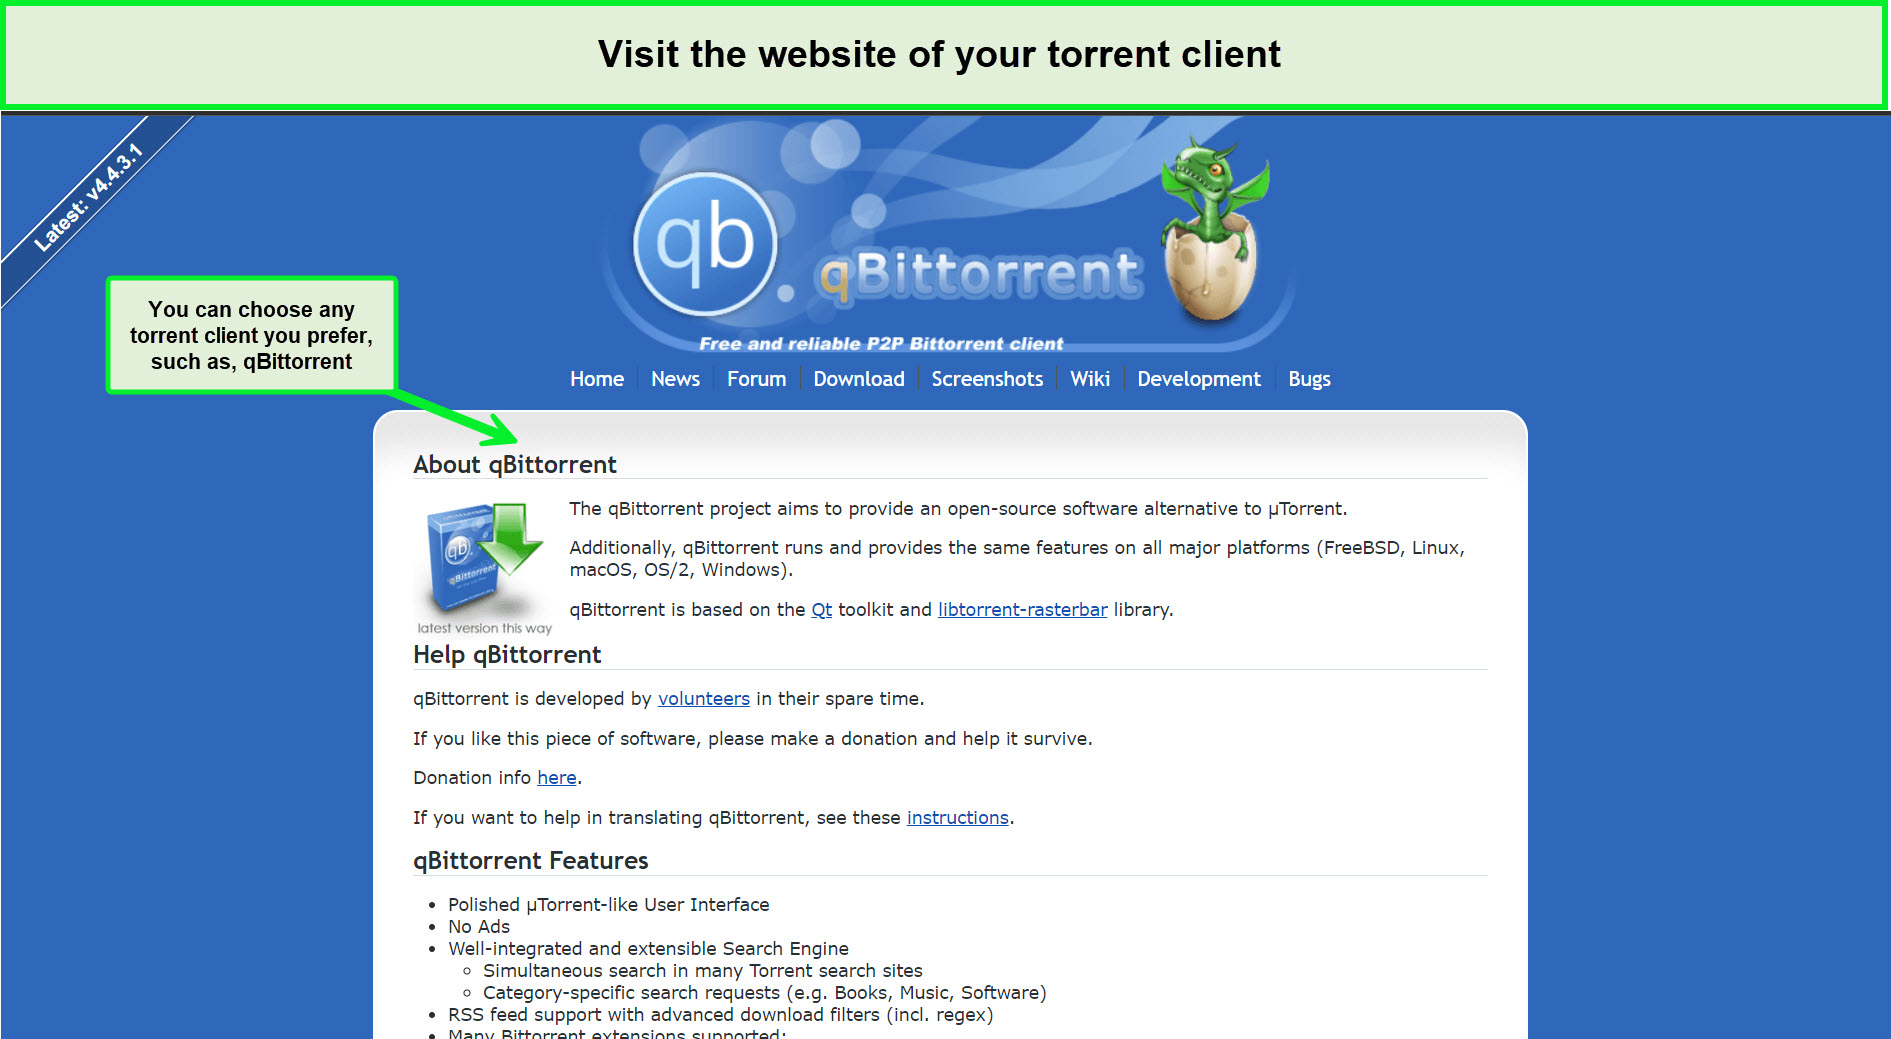 torrent-client-in-USA